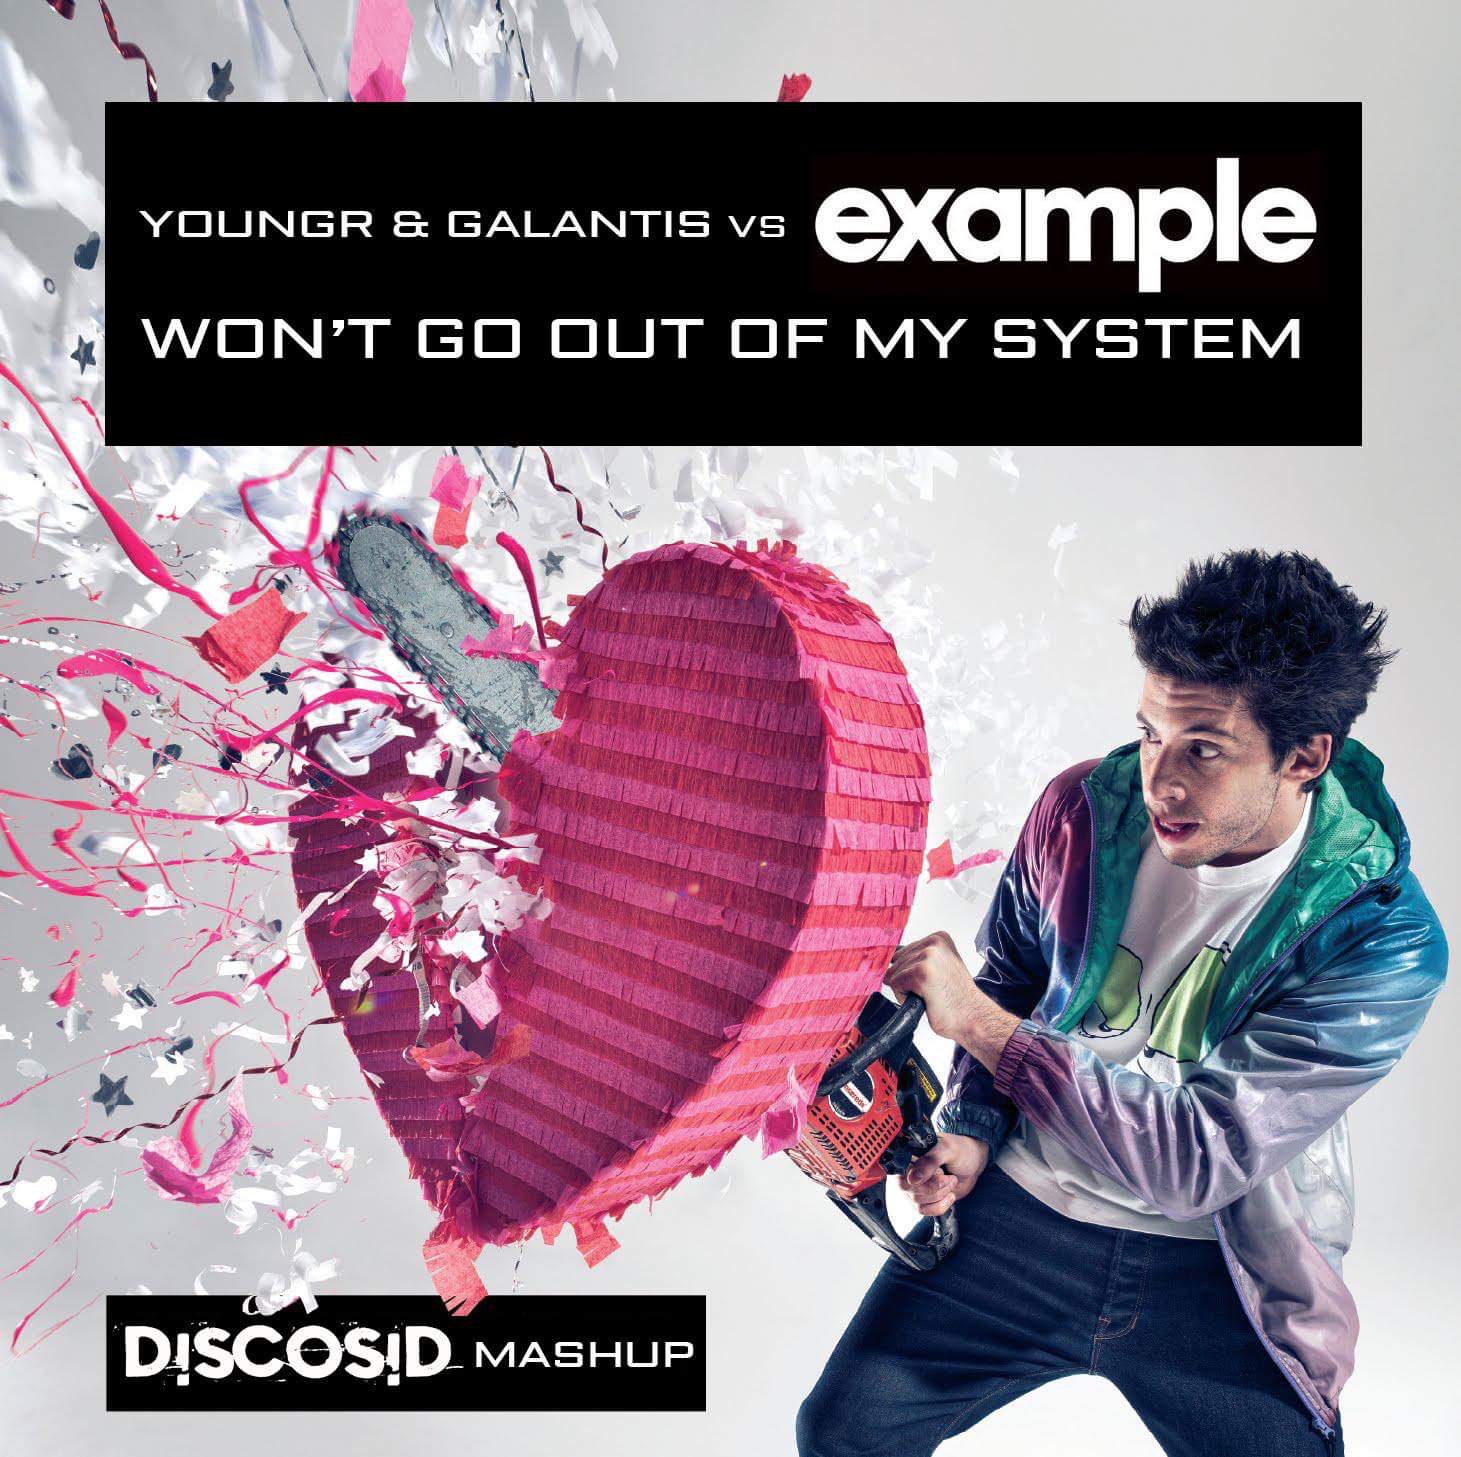 Youngr & Galantis Vs Example - Won't Go Out Of My System (Discosid Mashup)